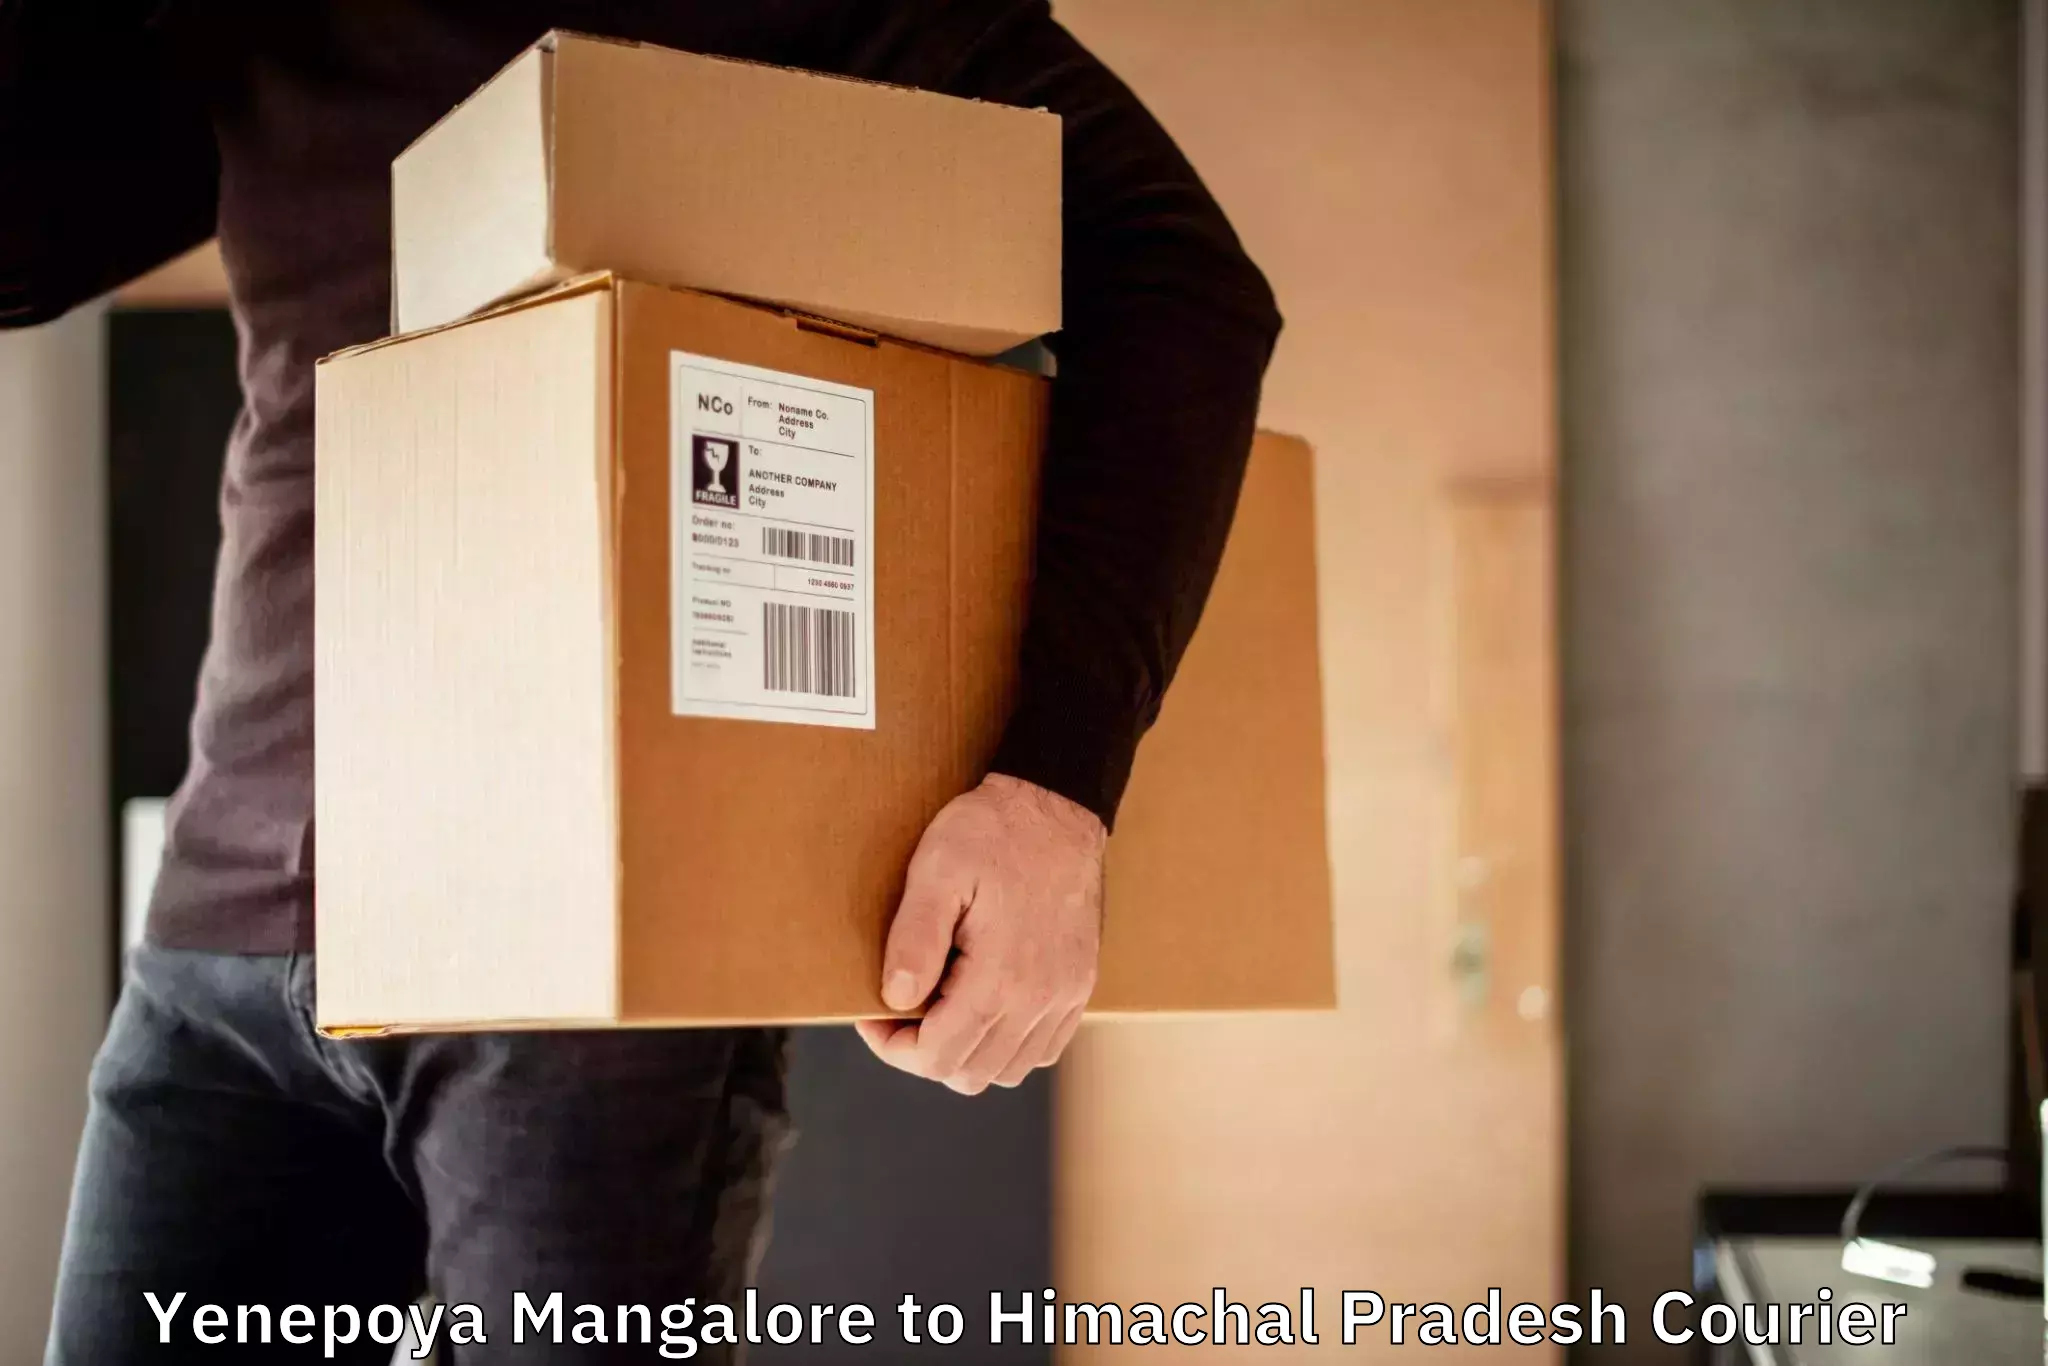 Secure freight services in Yenepoya Mangalore to Nalagarh